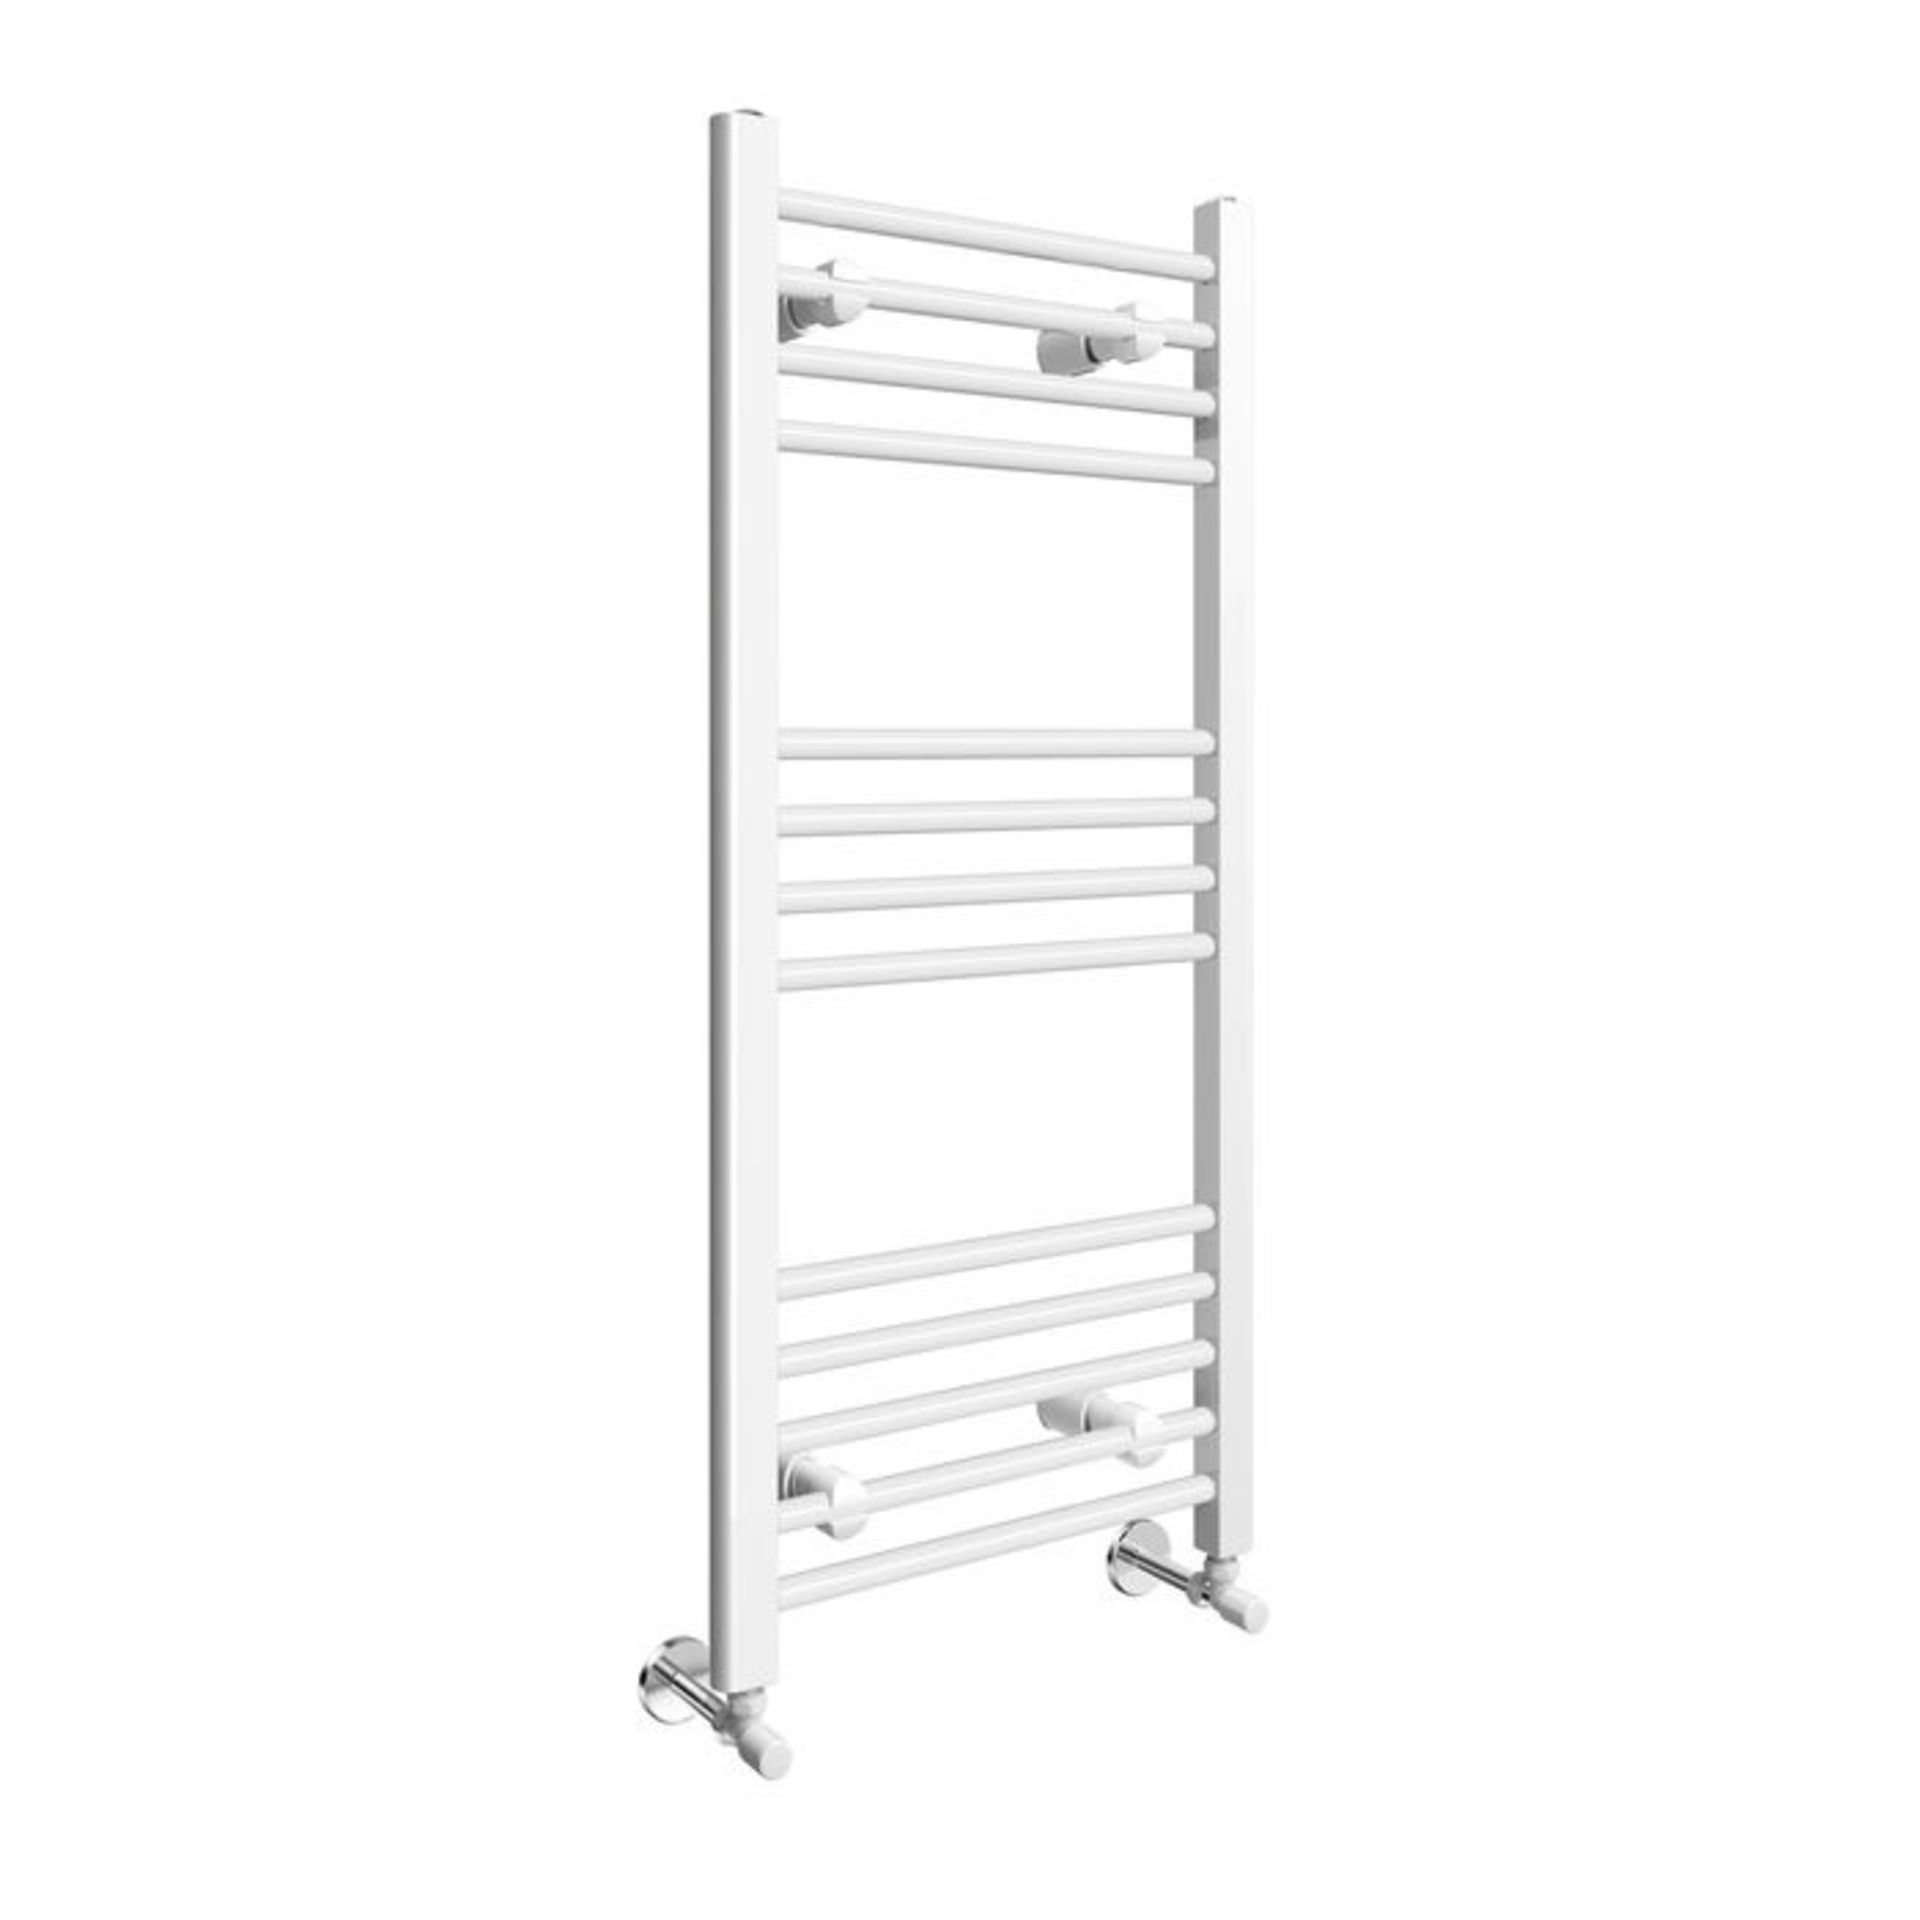 (JM154) 1000x450mm White Straight Rail Ladder Towel Radiator. Made from low carbon steel Finished - Image 3 of 3